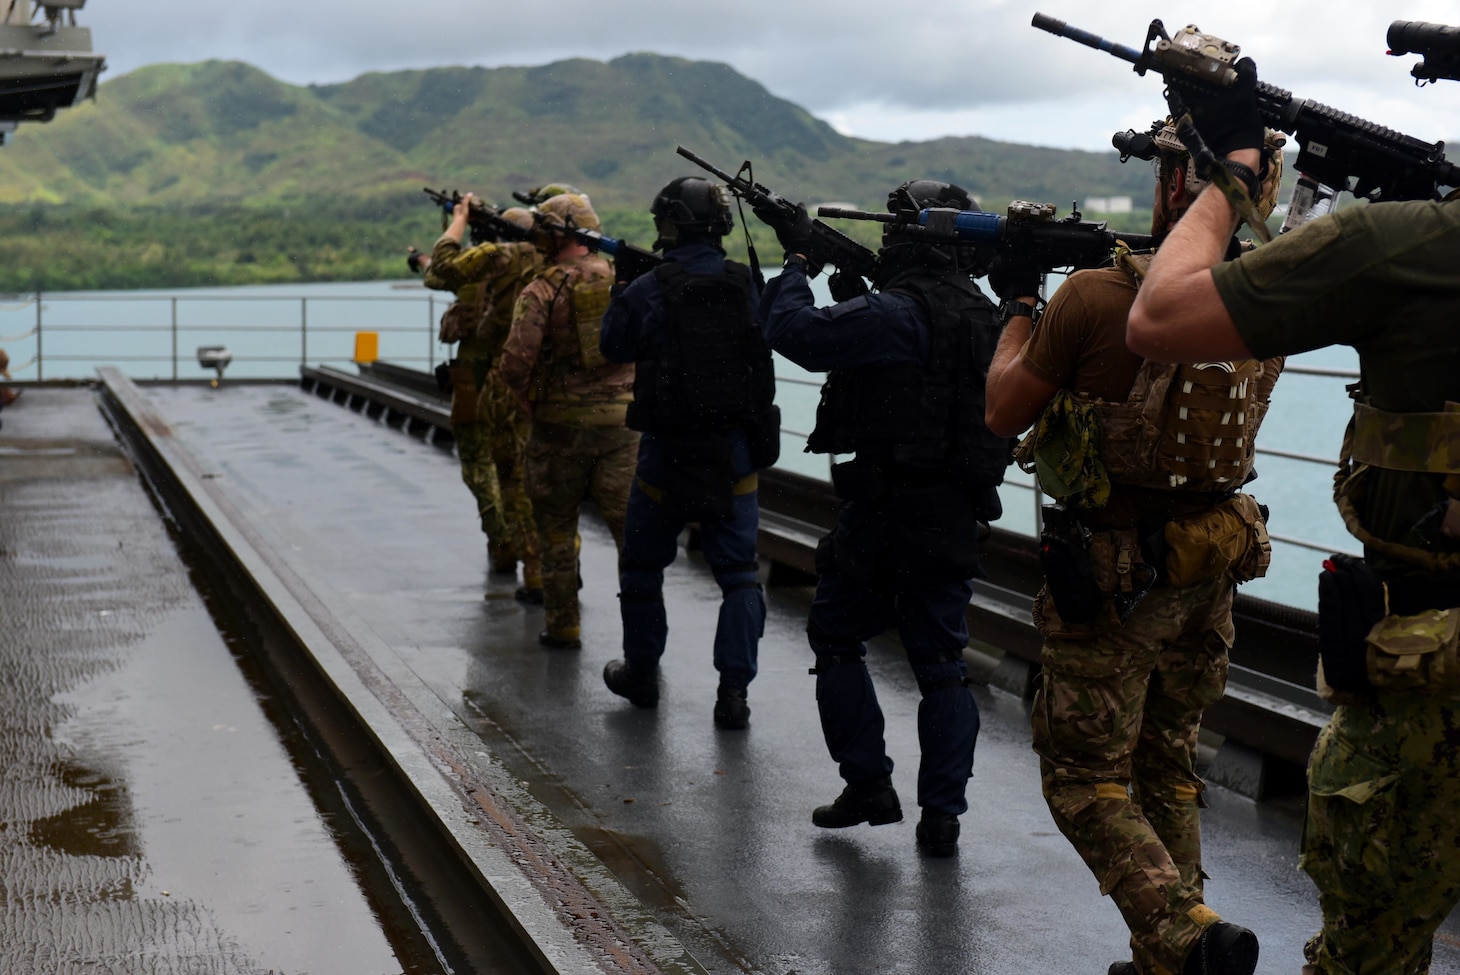 Nsw Wraps Up Sof Phase Of Malabar With Partner Nations Commander U S 7th Fleet Display